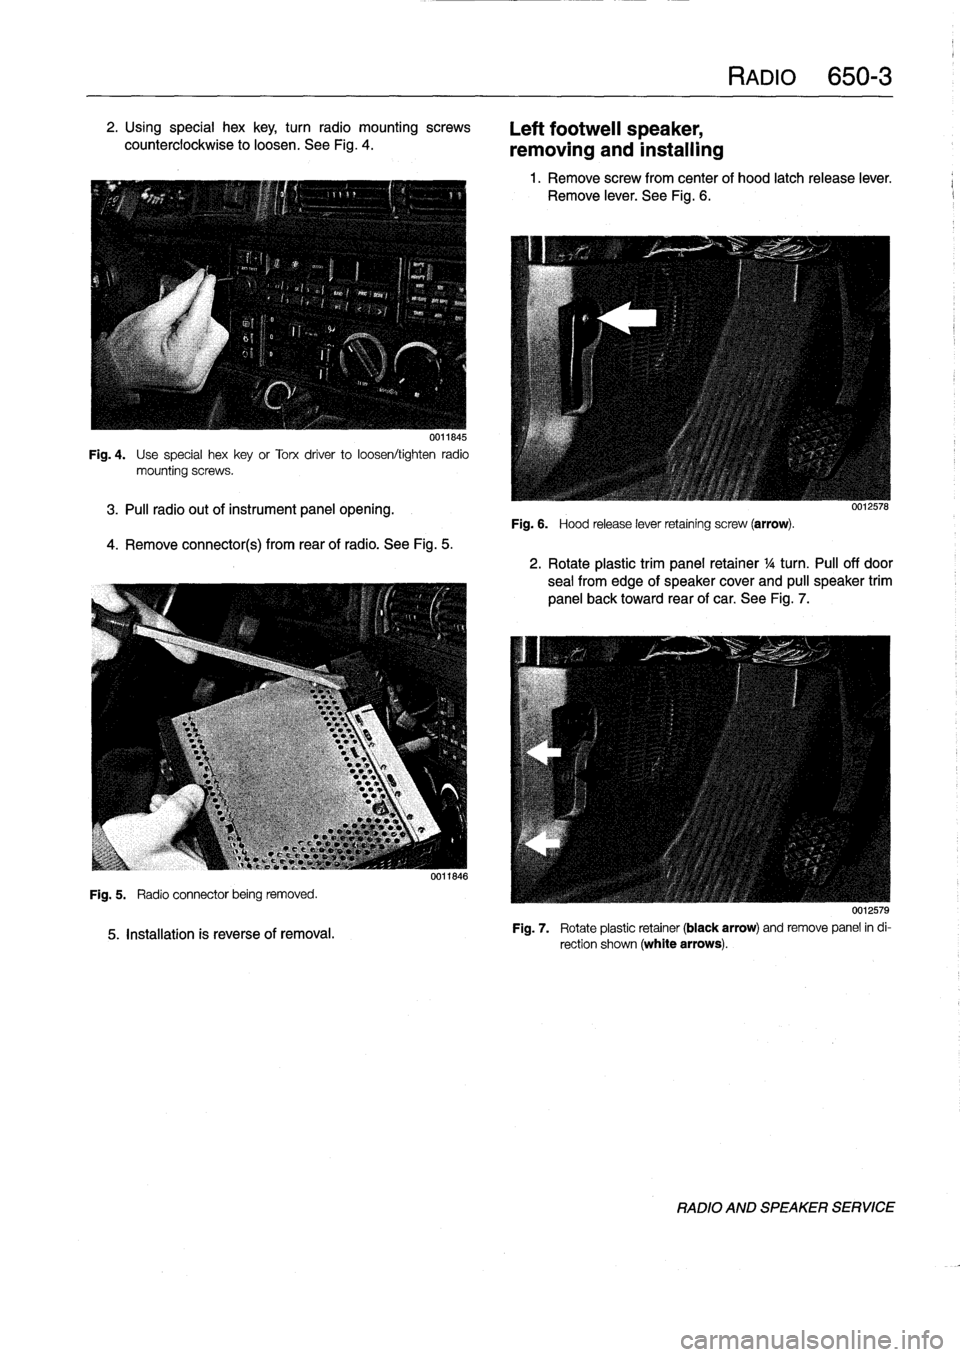 BMW 323i 1993 E36 Service Manual 2
.
Using
special
hex
key,
turn
radio
mountingscrews

counterclockwise
to
loosen
.
See
Fig
.
4
.

0011845

Fig
.
4
.

	

Use
special
hexkey
or
Torx
driver
to
loosen/tighten
radio
mountingscrews
.

3
.